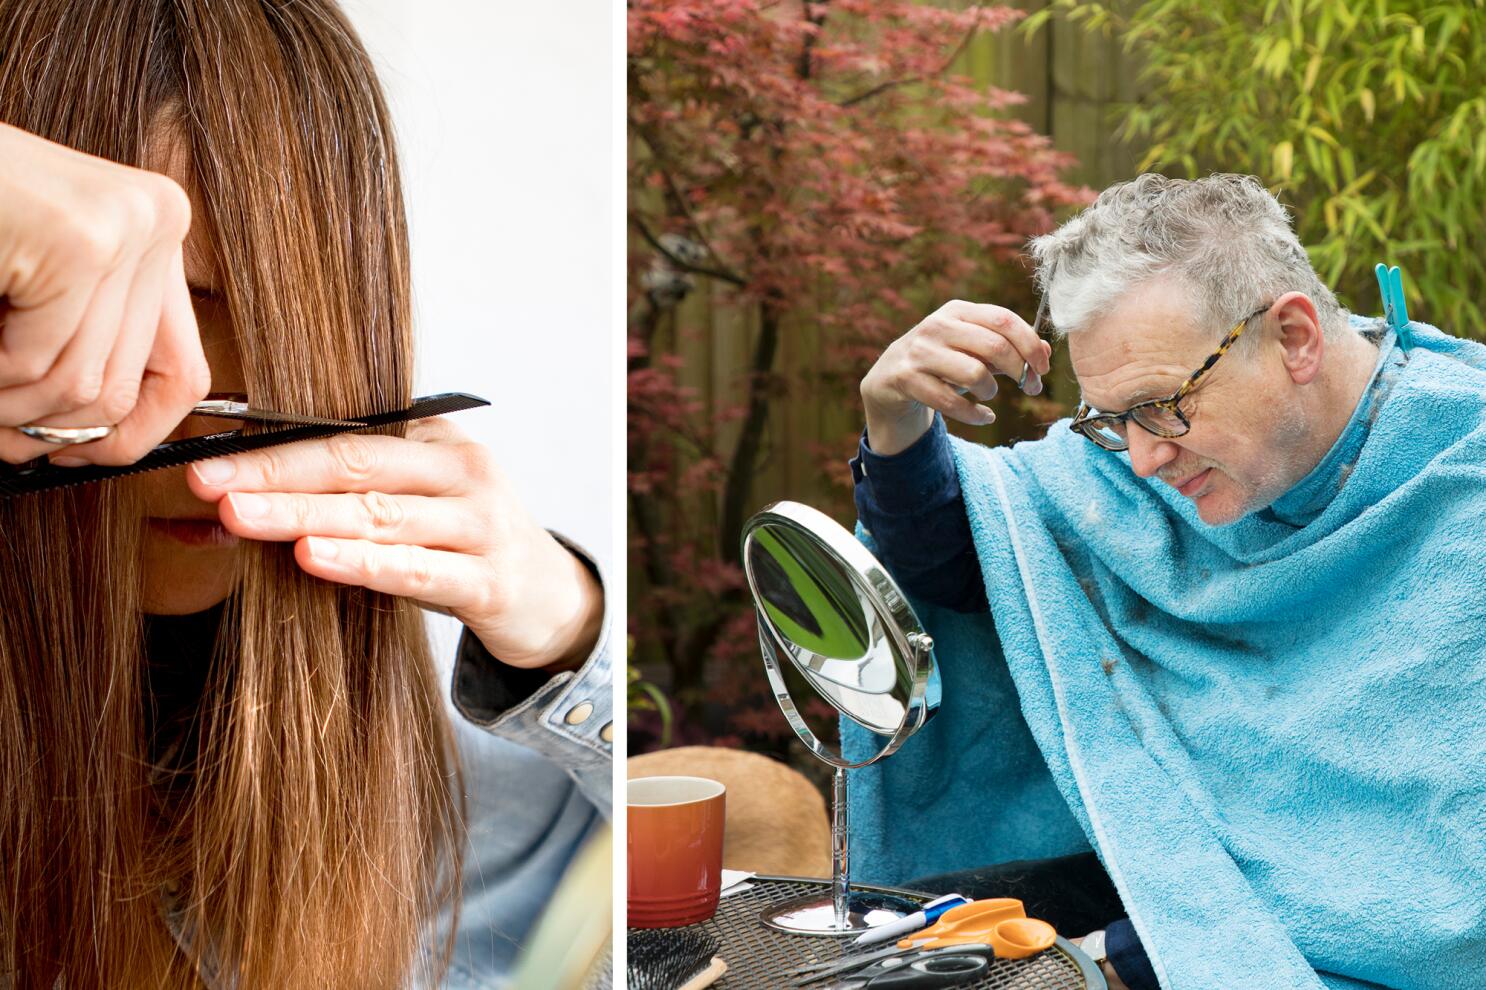 7 Best Hair Scissors For Cutting Hair At Home, According To Experts - Luxy®  Hair